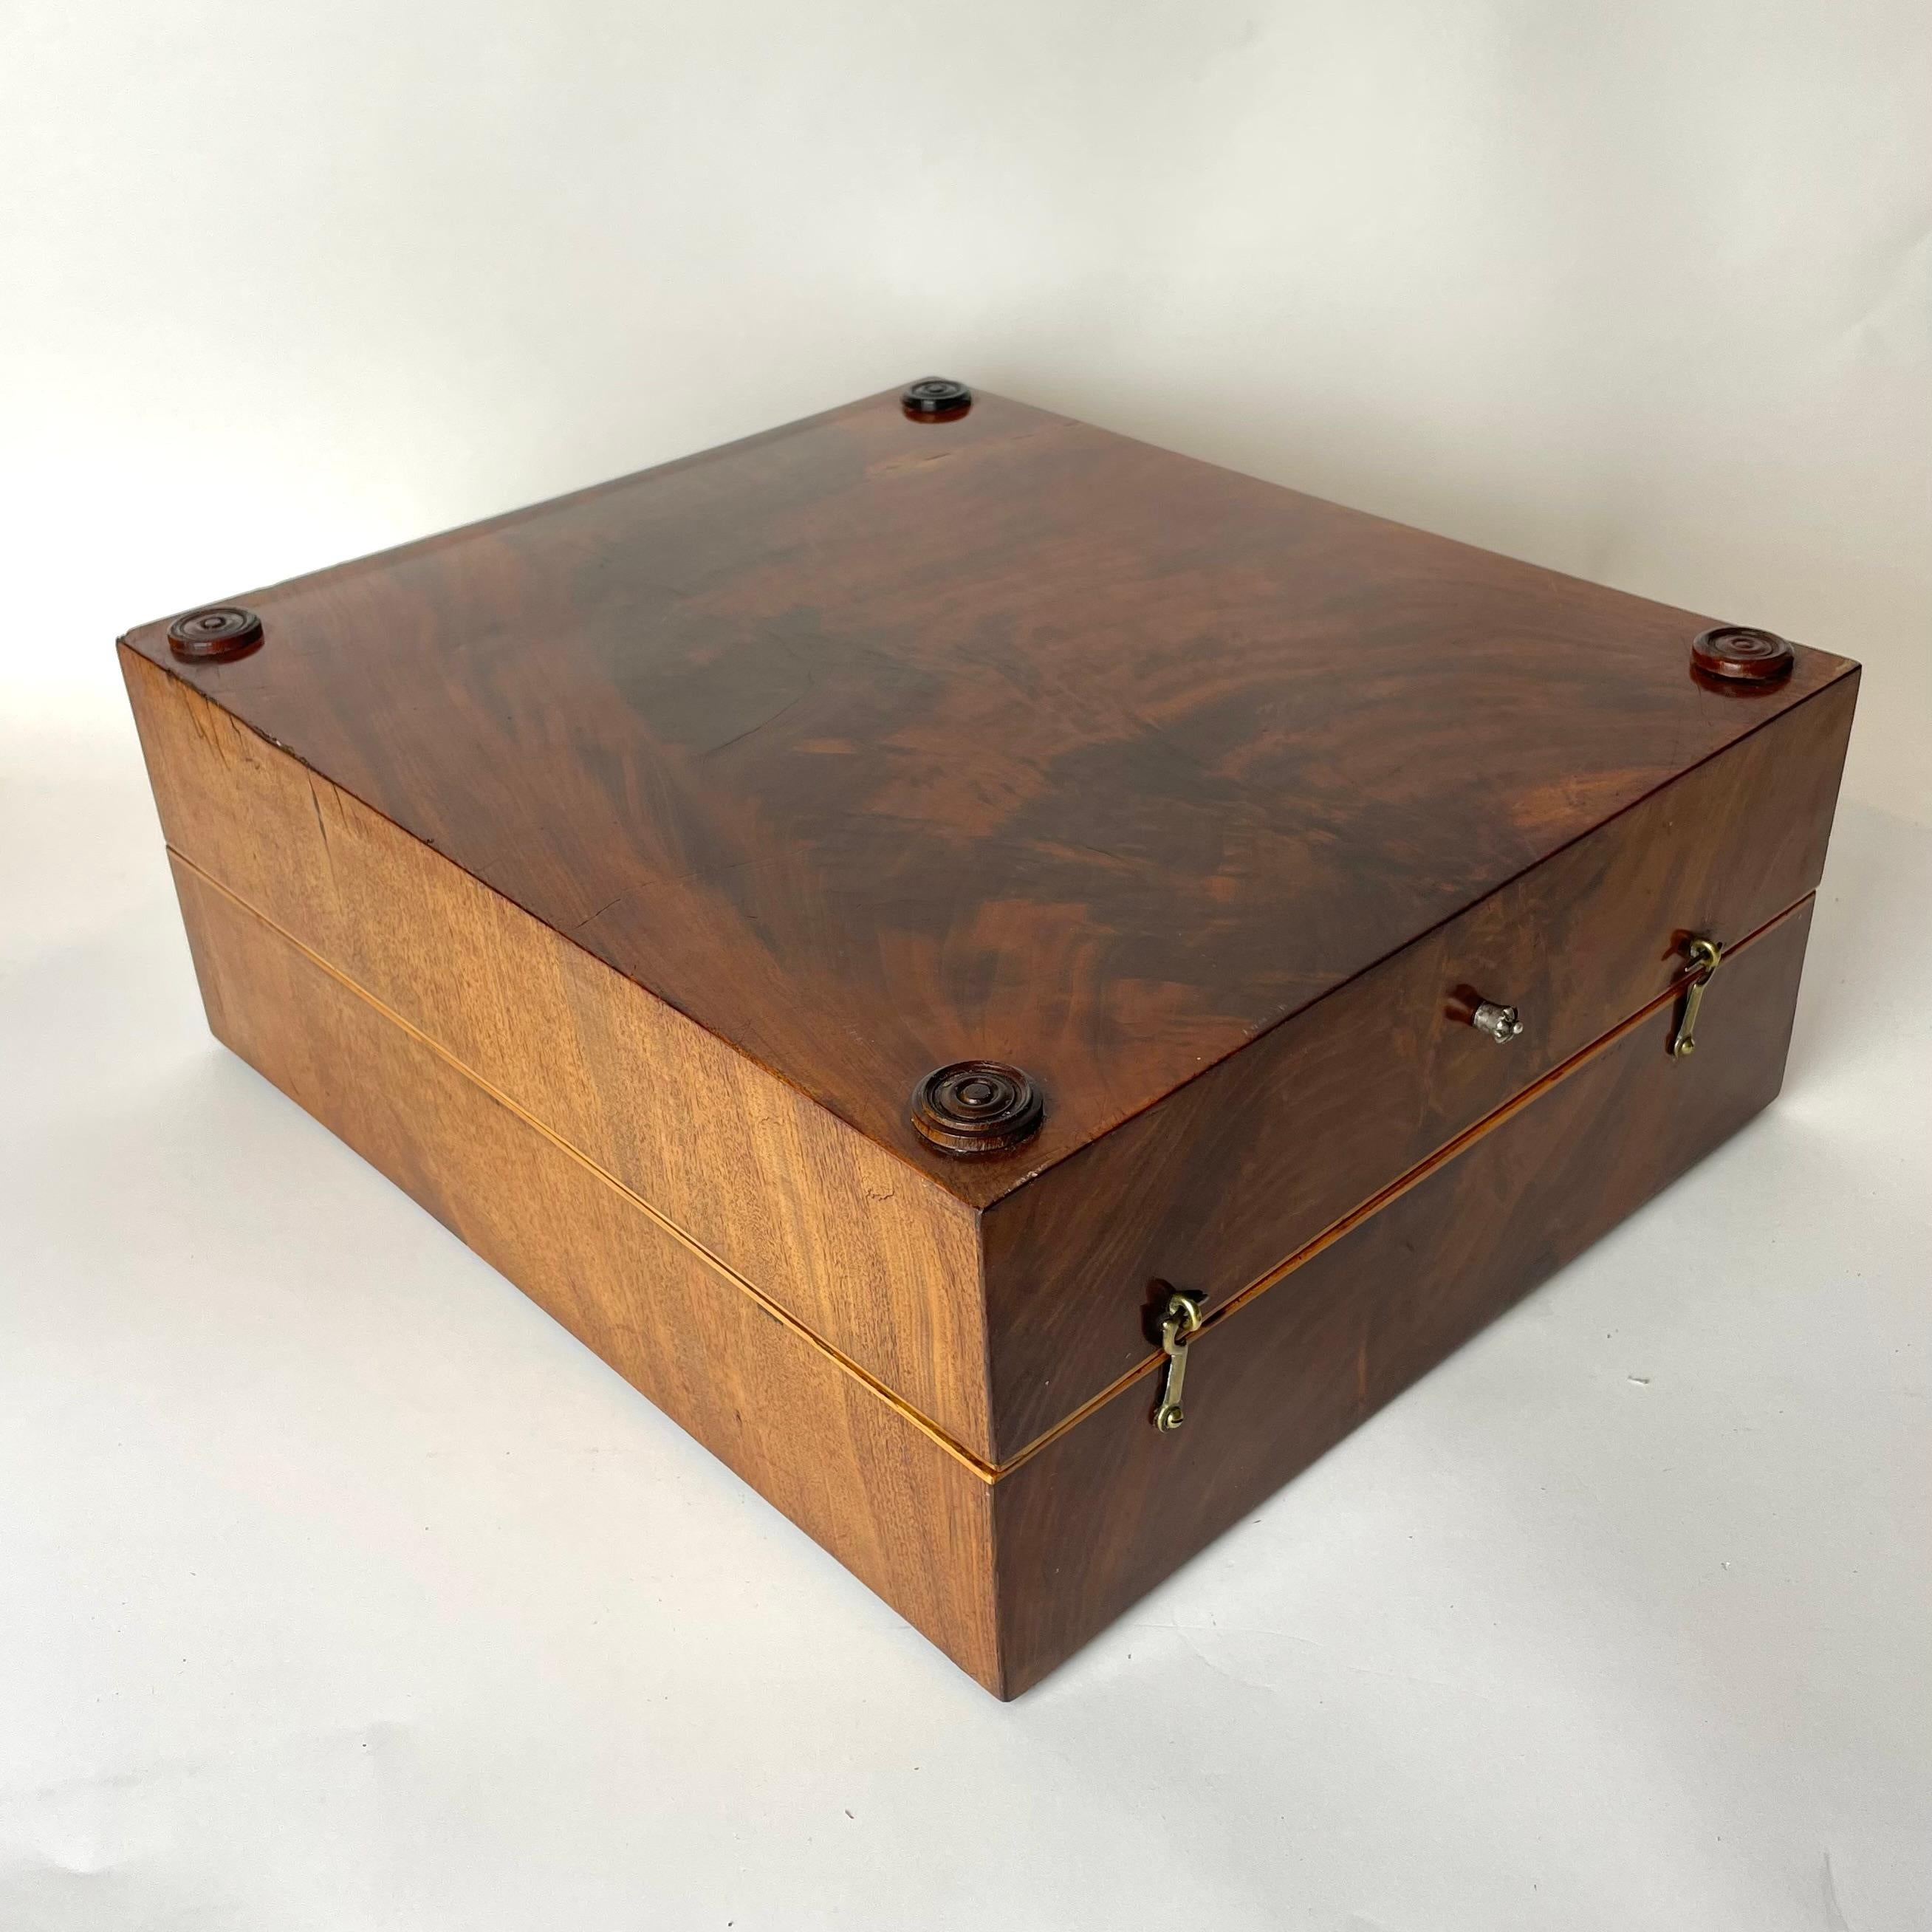 European Empire Backgammon Games Box in Mahogany with Pieces, early 19th Century For Sale